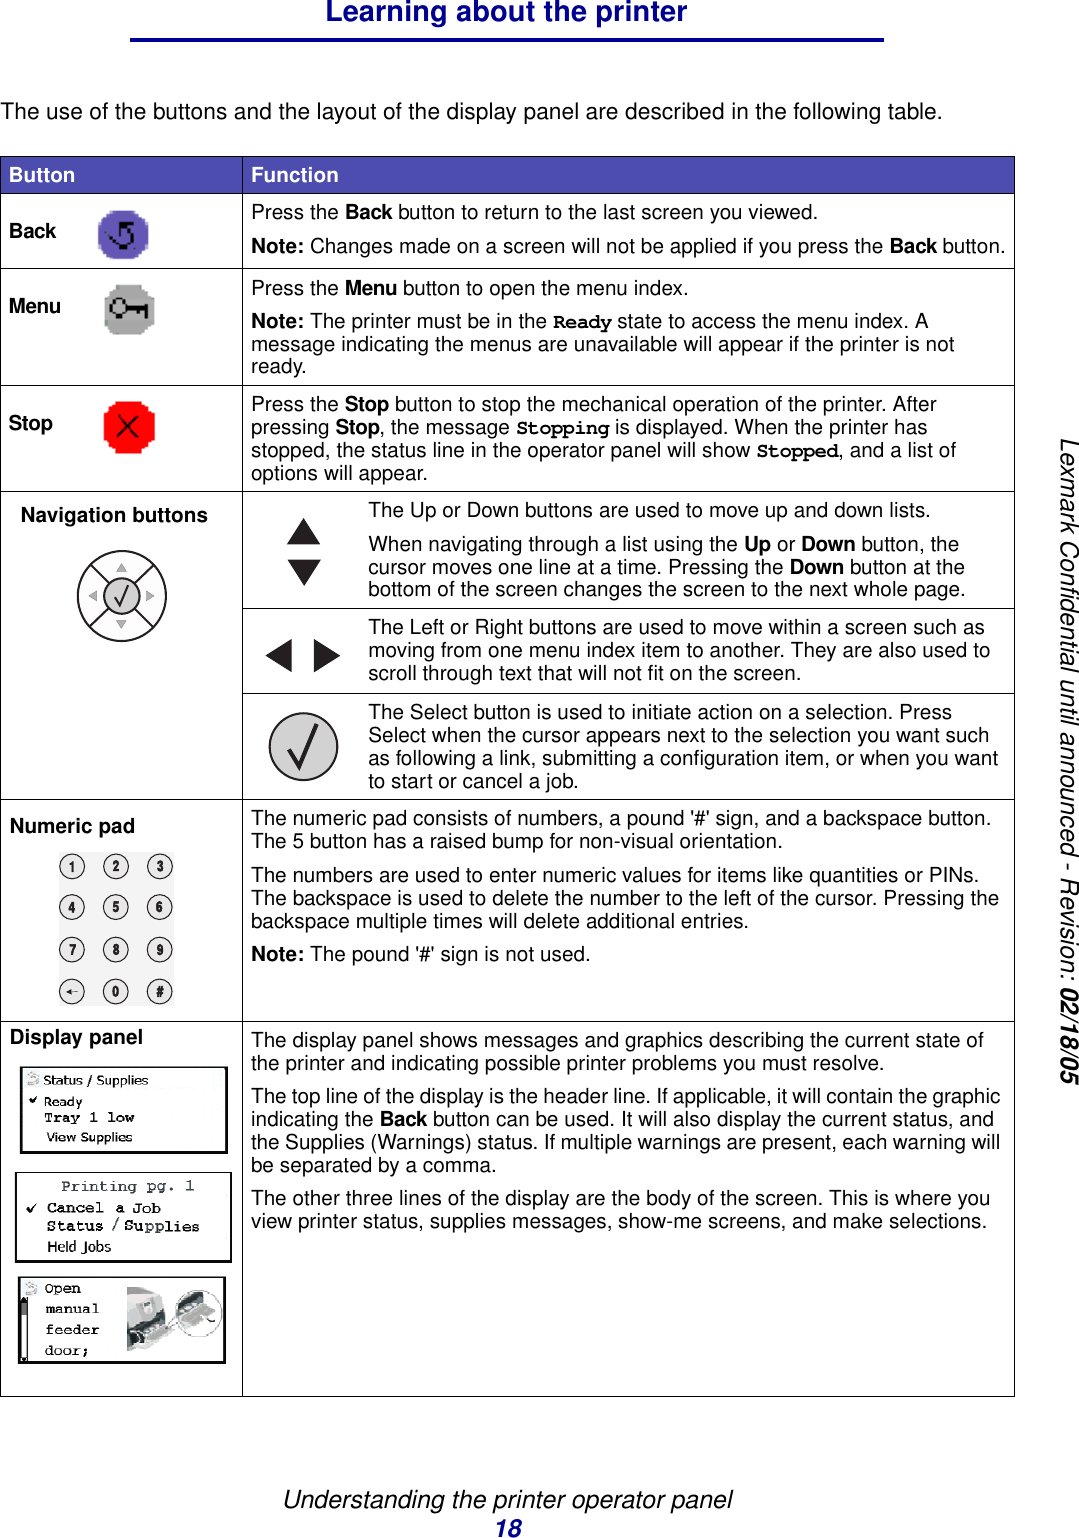 Understanding the printer operator panel18Learning about the printerLexmark Confidential until announced - Revision: 02/18/05The use of the buttons and the layout of the display panel are described in the following table.Button FunctionBack  Press the Back button to return to the last screen you viewed.Note: Changes made on a screen will not be applied if you press the Back button.Menu  Press the Menu button to open the menu index. Note: The printer must be in the Ready state to access the menu index. A message indicating the menus are unavailable will appear if the printer is not ready.Stop  Press the Stop button to stop the mechanical operation of the printer. After pressing Stop, the message Stopping is displayed. When the printer has stopped, the status line in the operator panel will show Stopped, and a list of options will appear.The Up or Down buttons are used to move up and down lists.When navigating through a list using the Up or Down button, the cursor moves one line at a time. Pressing the Down button at the bottom of the screen changes the screen to the next whole page.The Left or Right buttons are used to move within a screen such as moving from one menu index item to another. They are also used to scroll through text that will not fit on the screen.The Select button is used to initiate action on a selection. Press Select when the cursor appears next to the selection you want such as following a link, submitting a configuration item, or when you want to start or cancel a job.The numeric pad consists of numbers, a pound &apos;#&apos; sign, and a backspace button. The 5 button has a raised bump for non-visual orientation. The numbers are used to enter numeric values for items like quantities or PINs. The backspace is used to delete the number to the left of the cursor. Pressing the backspace multiple times will delete additional entries.Note: The pound &apos;#&apos; sign is not used.The display panel shows messages and graphics describing the current state of the printer and indicating possible printer problems you must resolve.The top line of the display is the header line. If applicable, it will contain the graphic indicating the Back button can be used. It will also display the current status, and the Supplies (Warnings) status. If multiple warnings are present, each warning will be separated by a comma.The other three lines of the display are the body of the screen. This is where you view printer status, supplies messages, show-me screens, and make selections.Navigation buttons1234567890#Numeric padDisplay panel